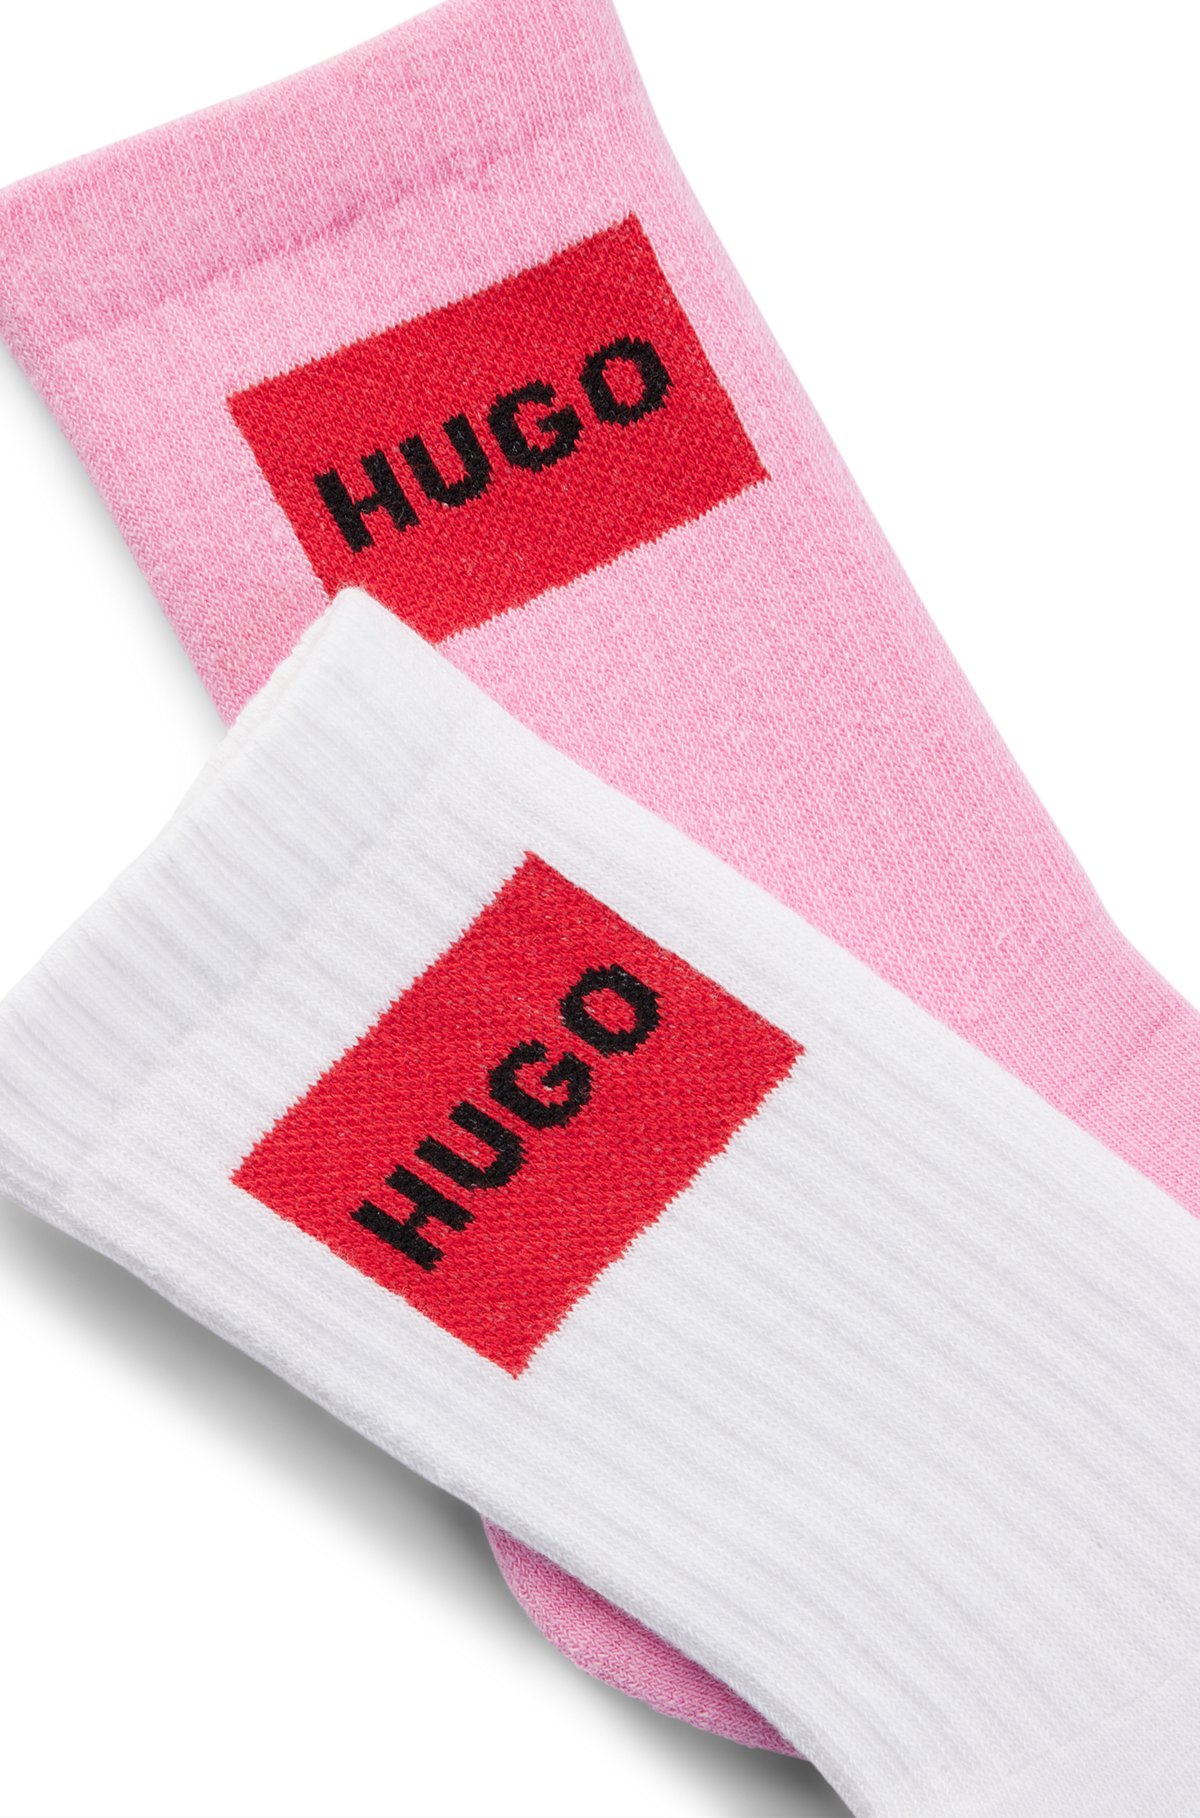 HUGO - Two-pack of short-length socks with red logo labels